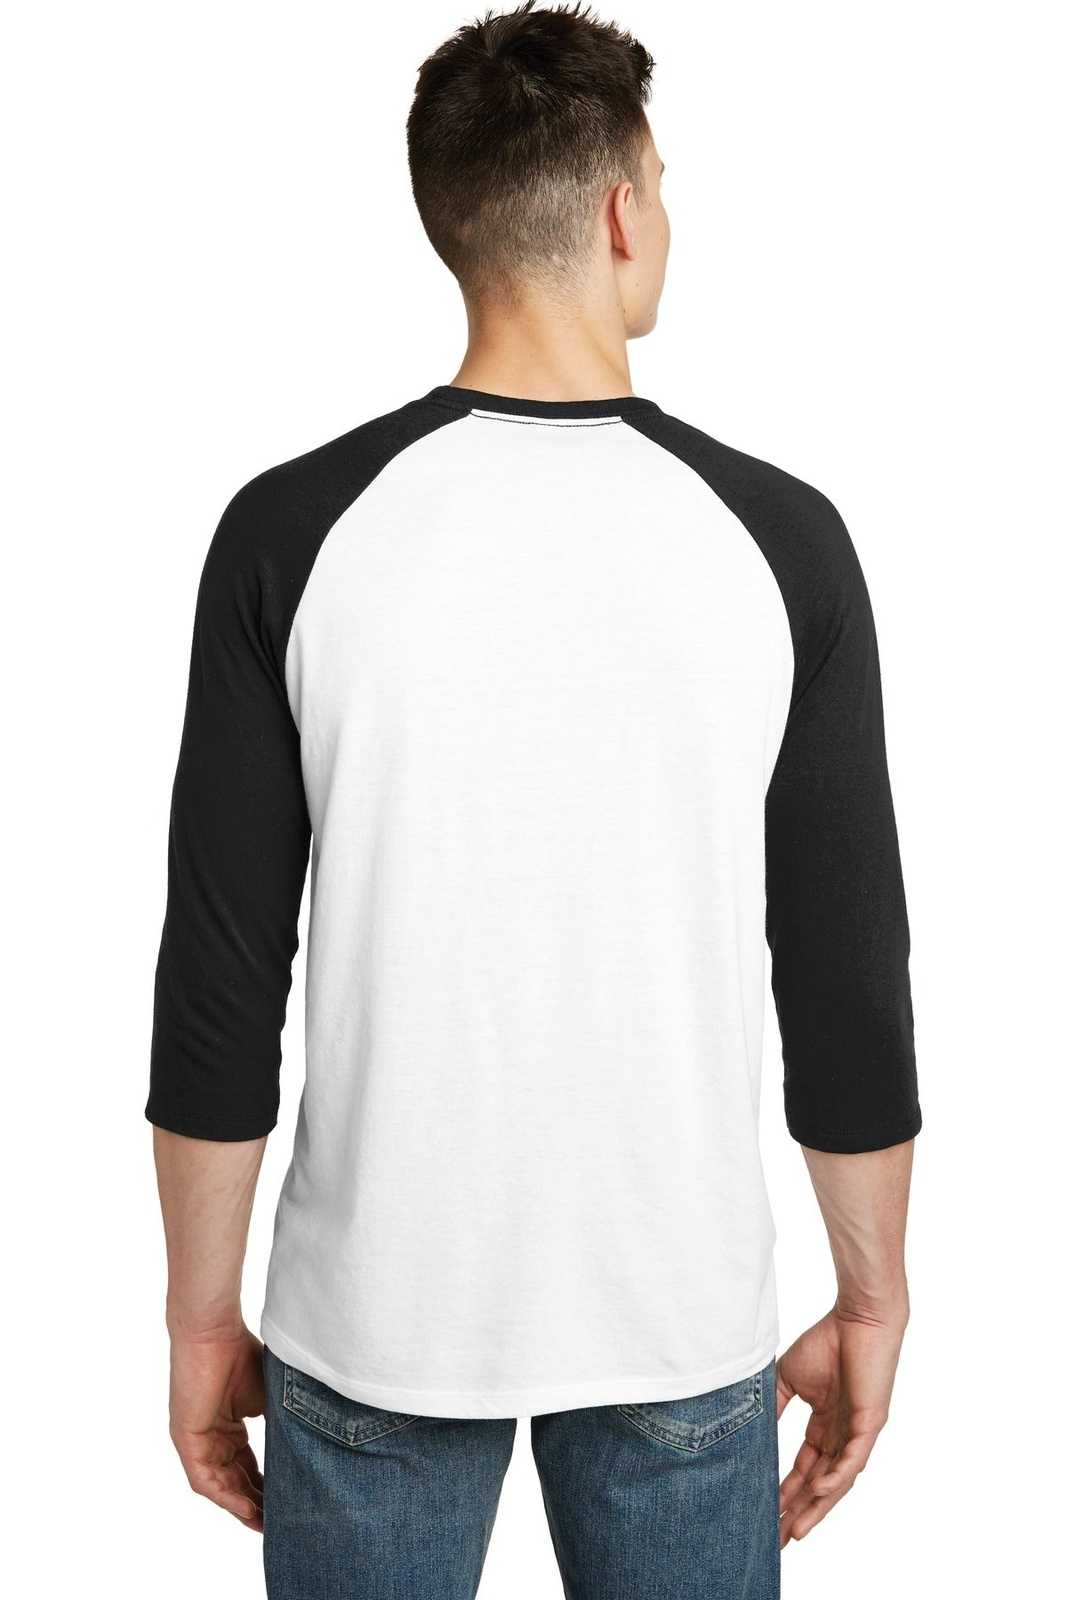 District DT6210 Very Important Tee 3/4-Sleeve Raglan - Black White - HIT a Double - 2